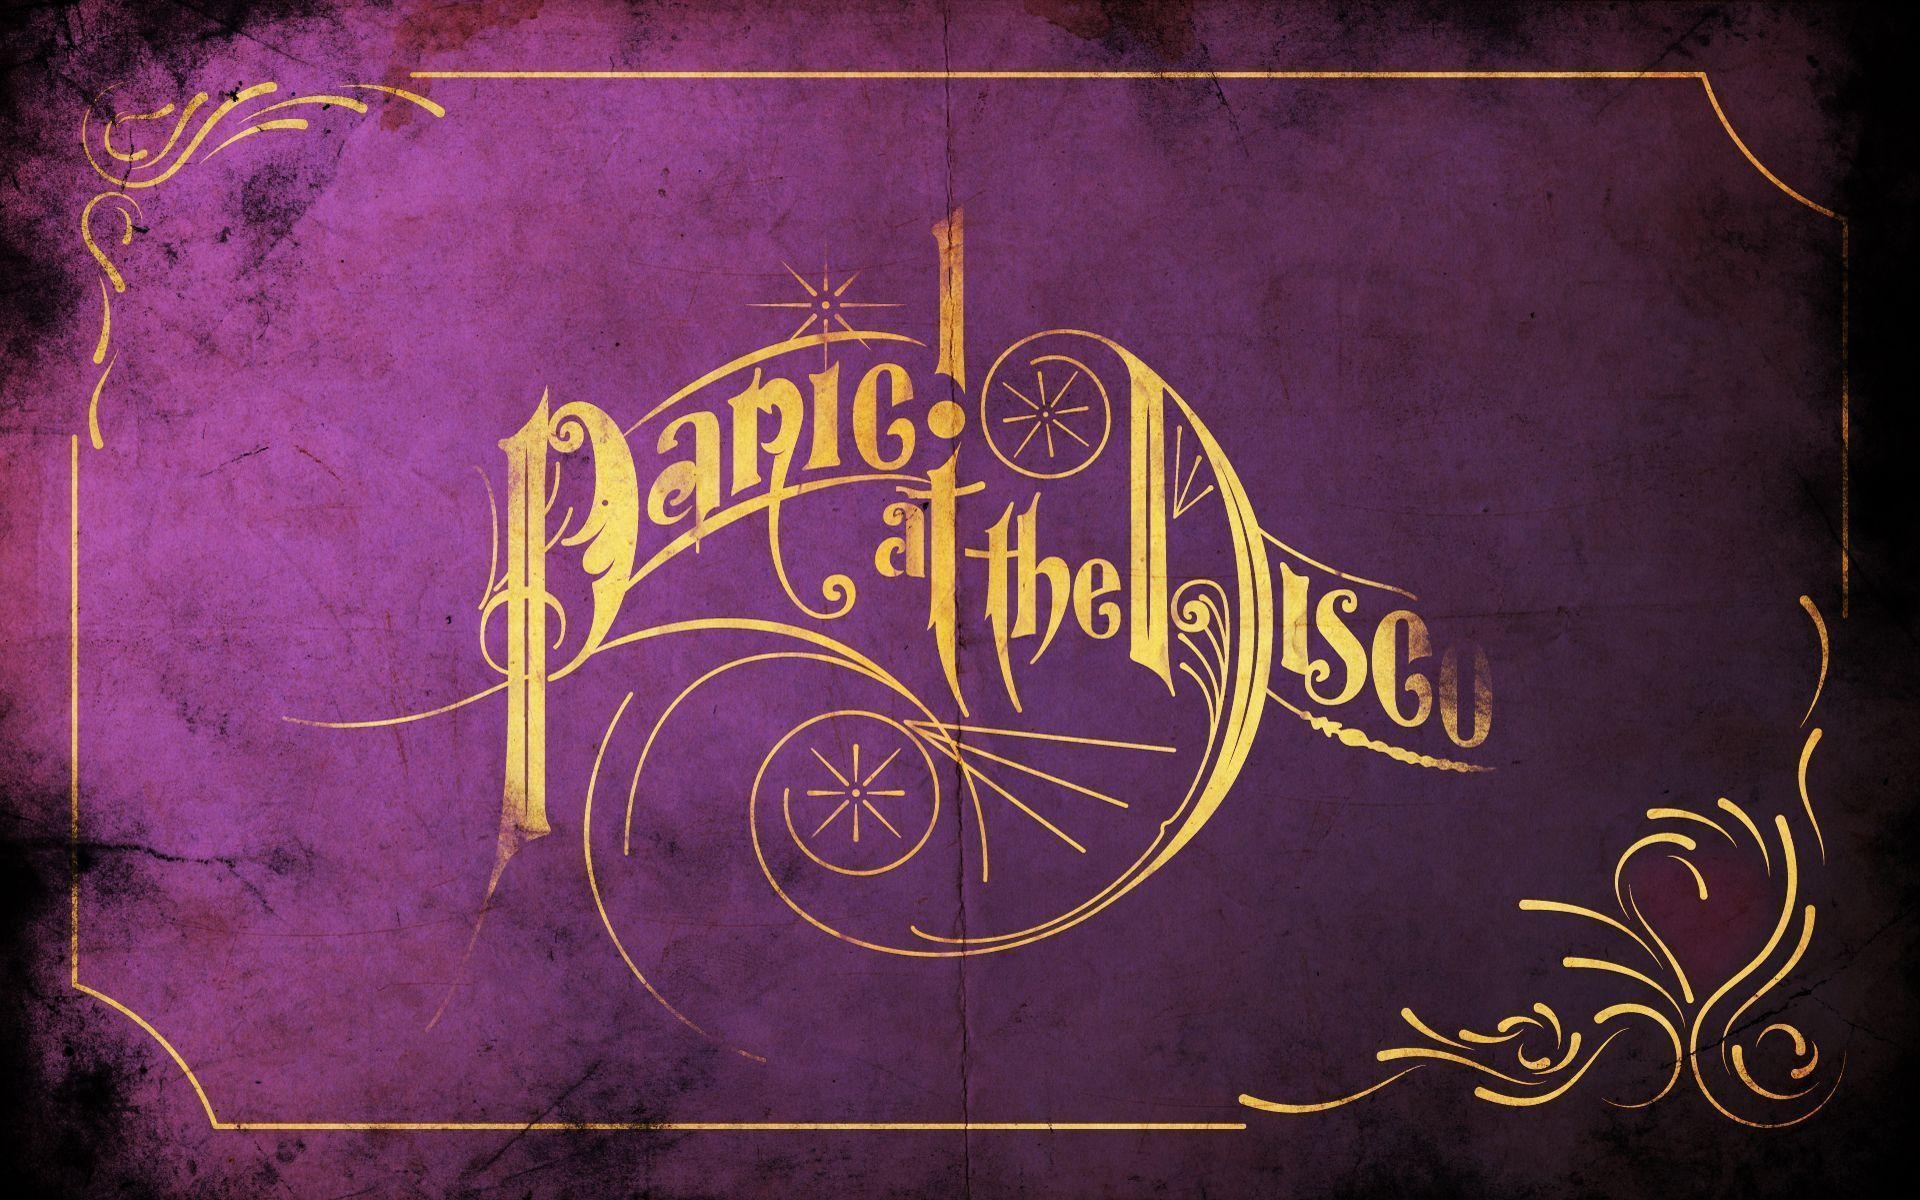 Panic! at the Disco wallpapers, Band imagery, Fan favorite songs, Musical creativity, 1920x1200 HD Desktop